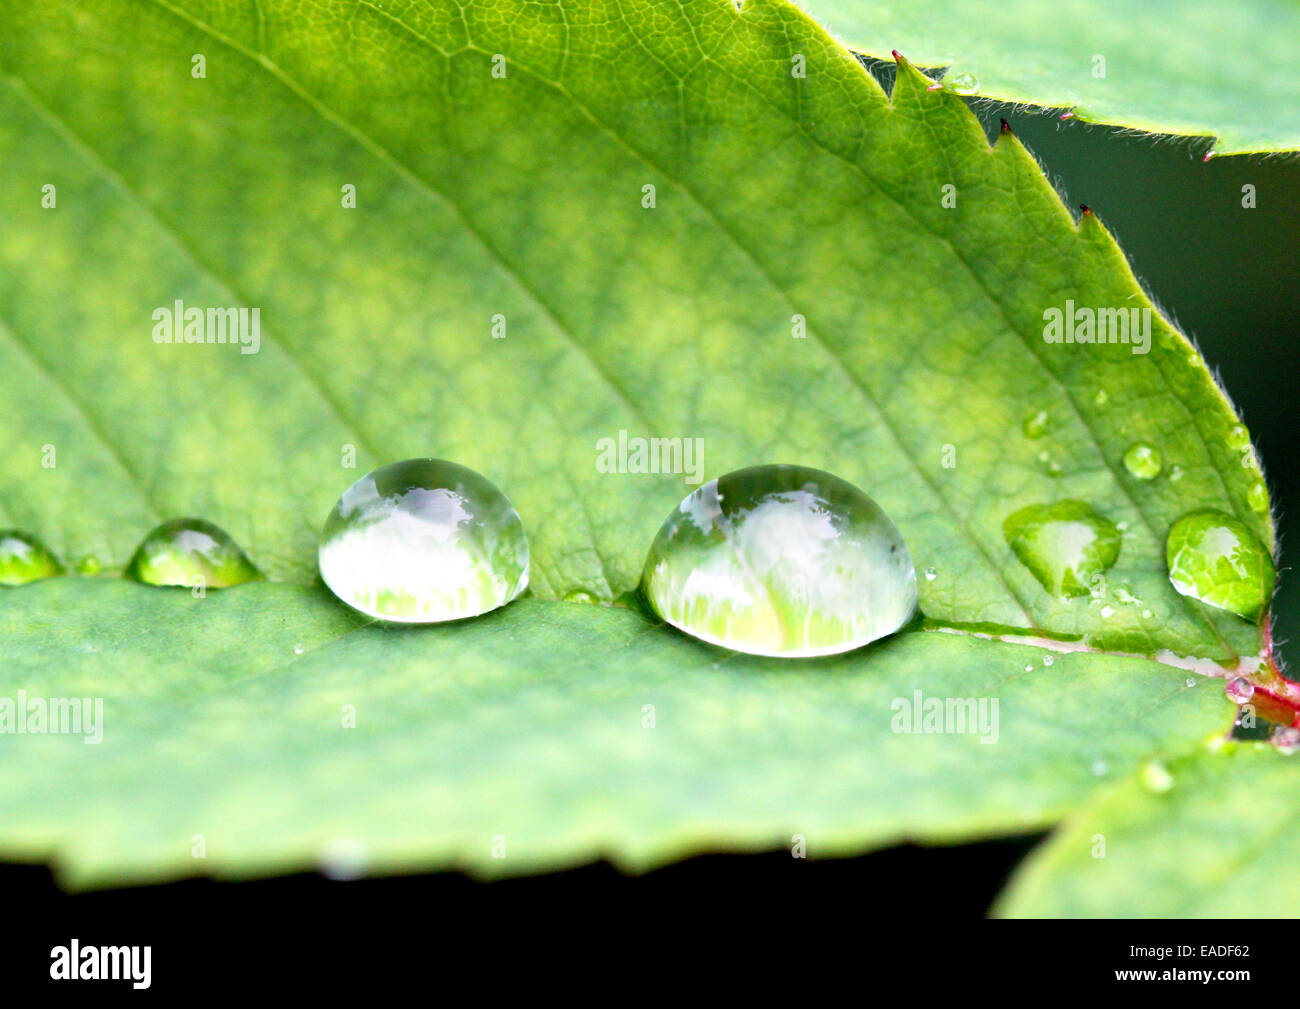 drop of water photographed close-up on a green leaf Stock Photo